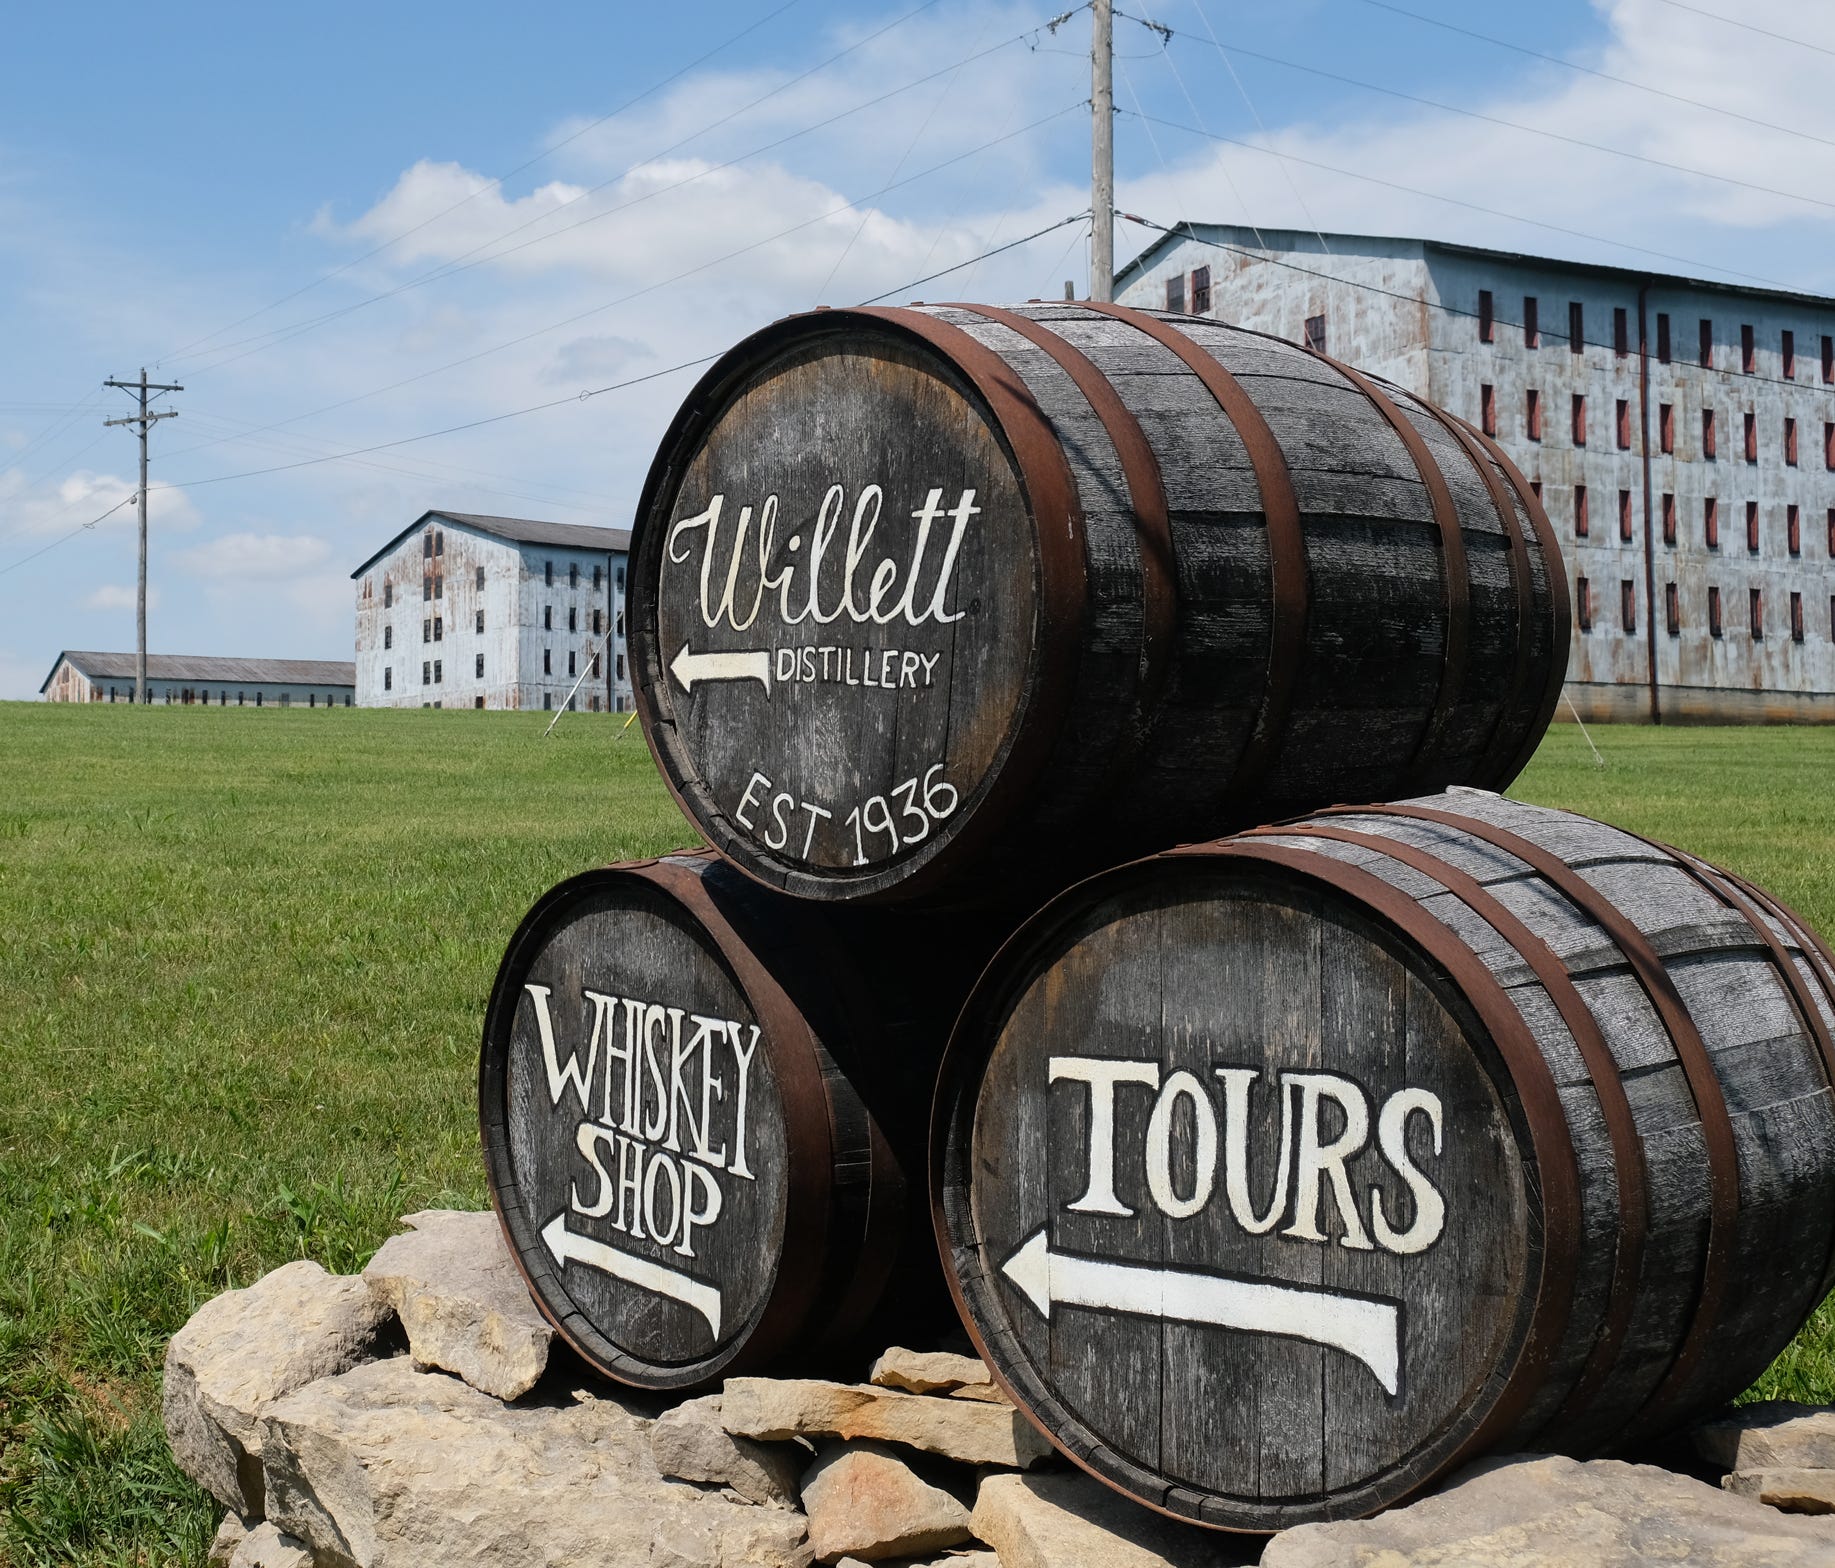 Located in Bardstown, Ky., Willett Distillery is one of the largest and oldest craft bourbon makers in Kentucky. Several brands of bourbon and rye are produced here under contract for other owners.